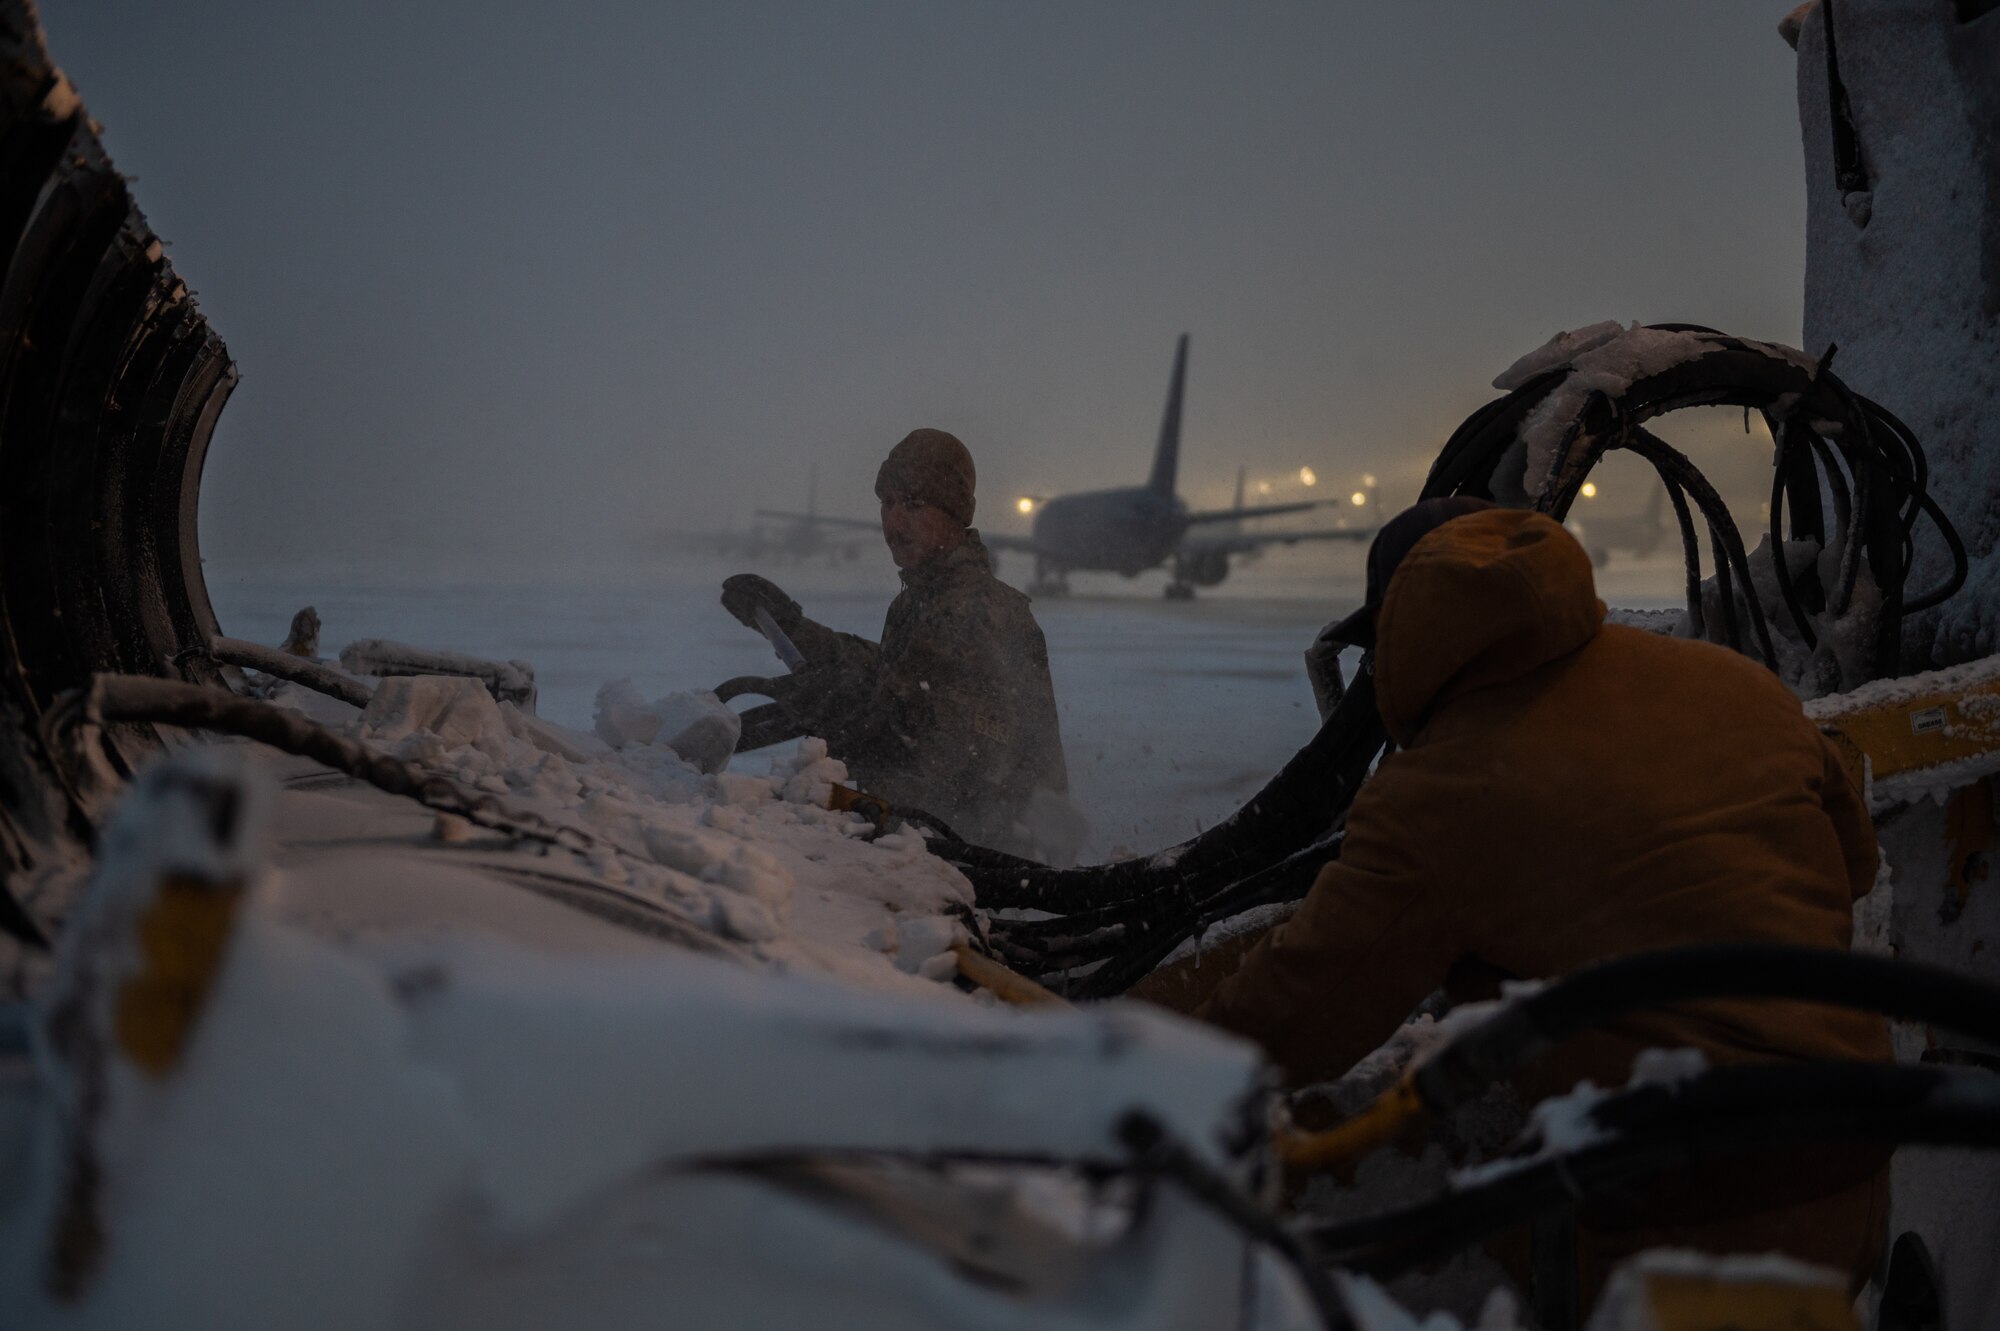 Senior Airman Trent Schroedl, structural journeyman, and Mr. Bryce Schroeder, structural systems maintenance mechanic, both assigned to the 22nd Civil Engineering Squadron’s snow removal team, clear snow from an Oshkosh Snow Plow Feb. 17, 2022, at McConnell Air Force Base, Kansas.